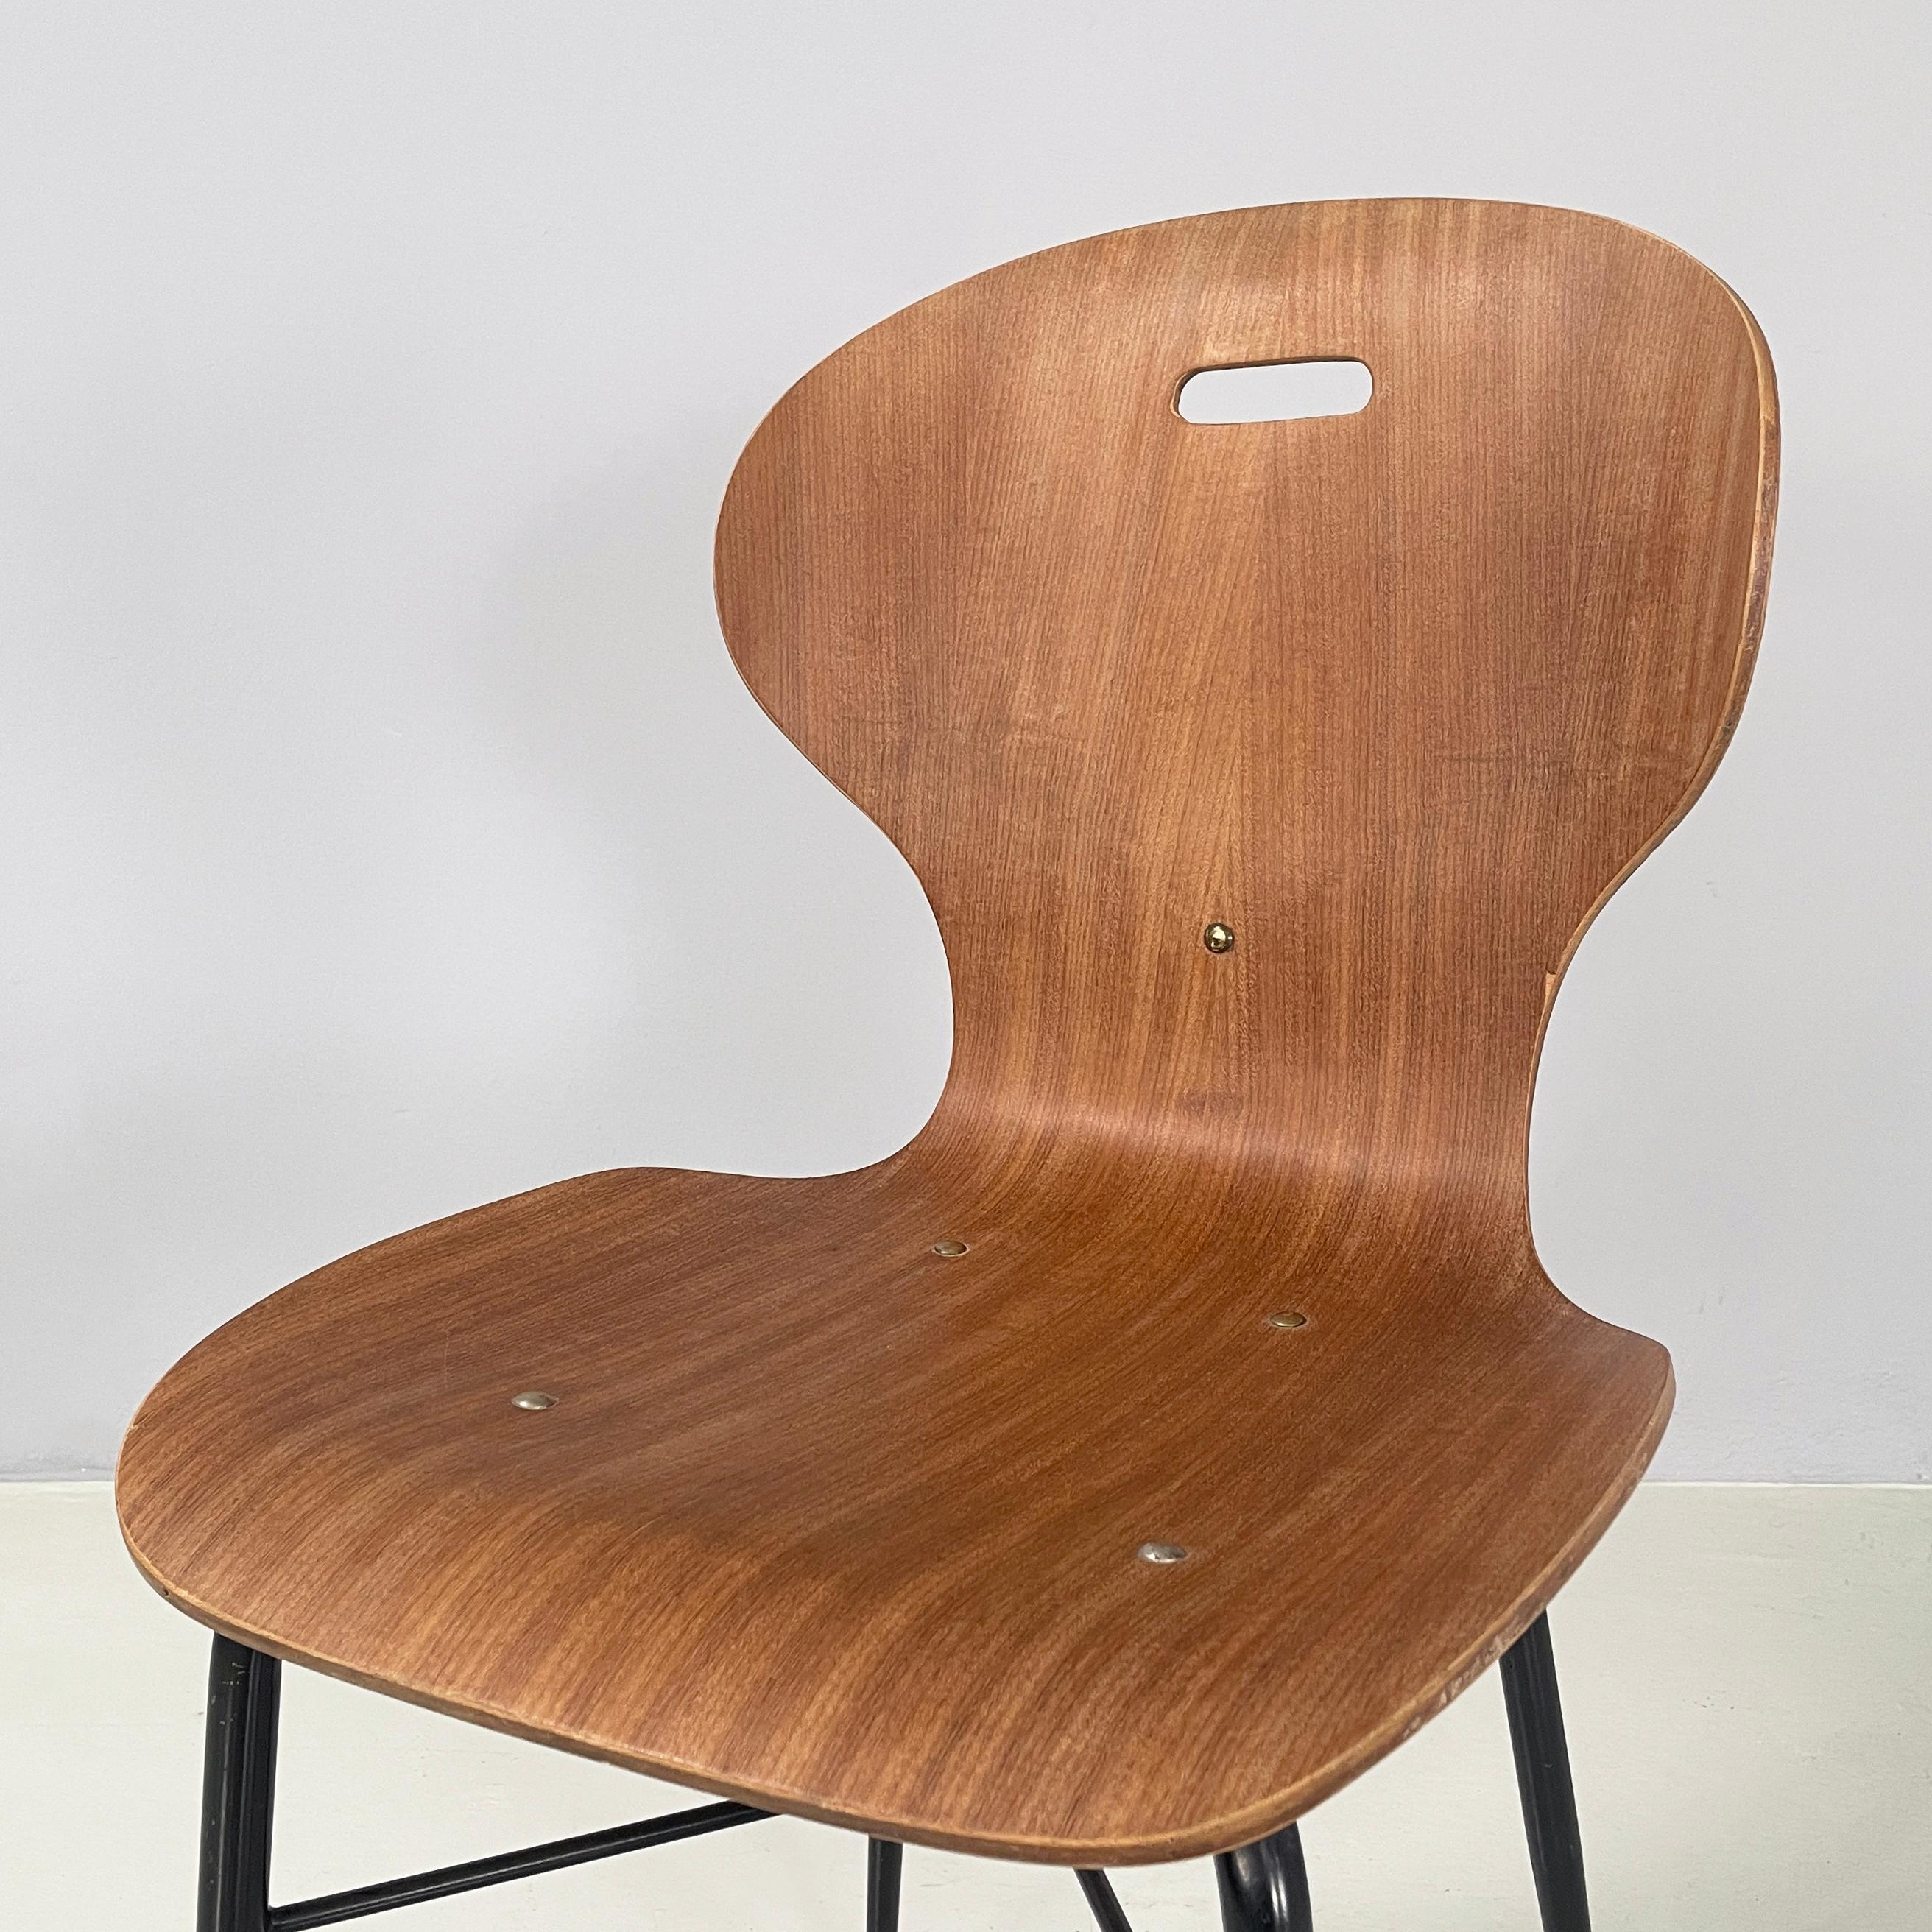 Mid-20th Century Italian mid-century modern Chair in curved wood and black metal, 1960s For Sale